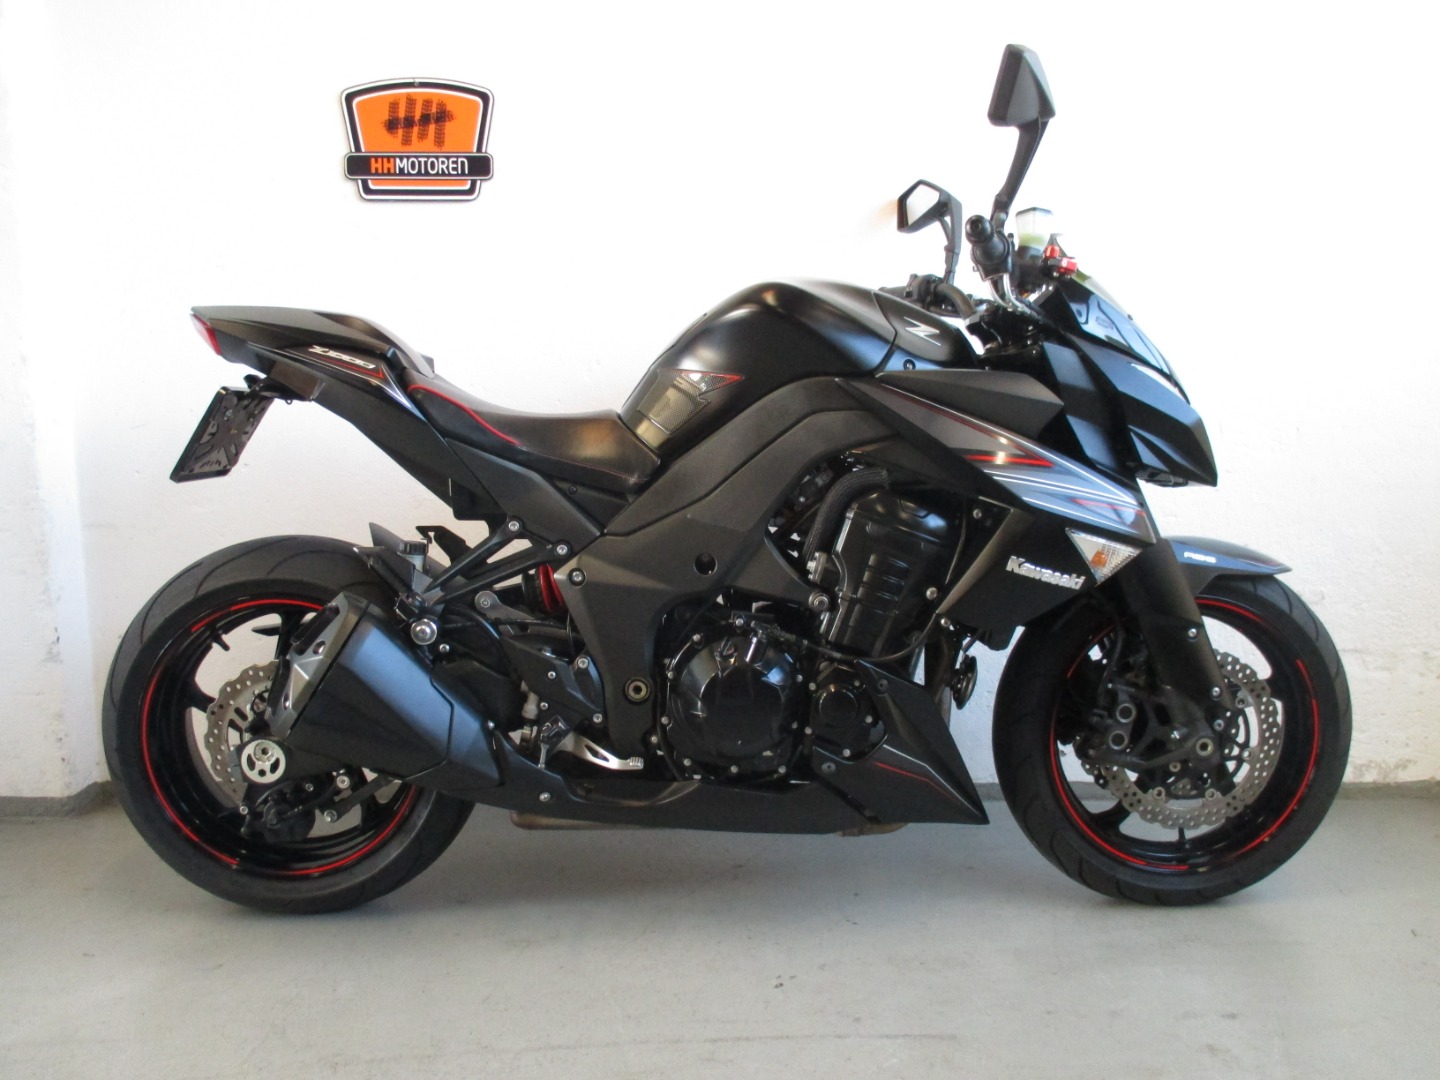 Z1000 Black Edition ABS